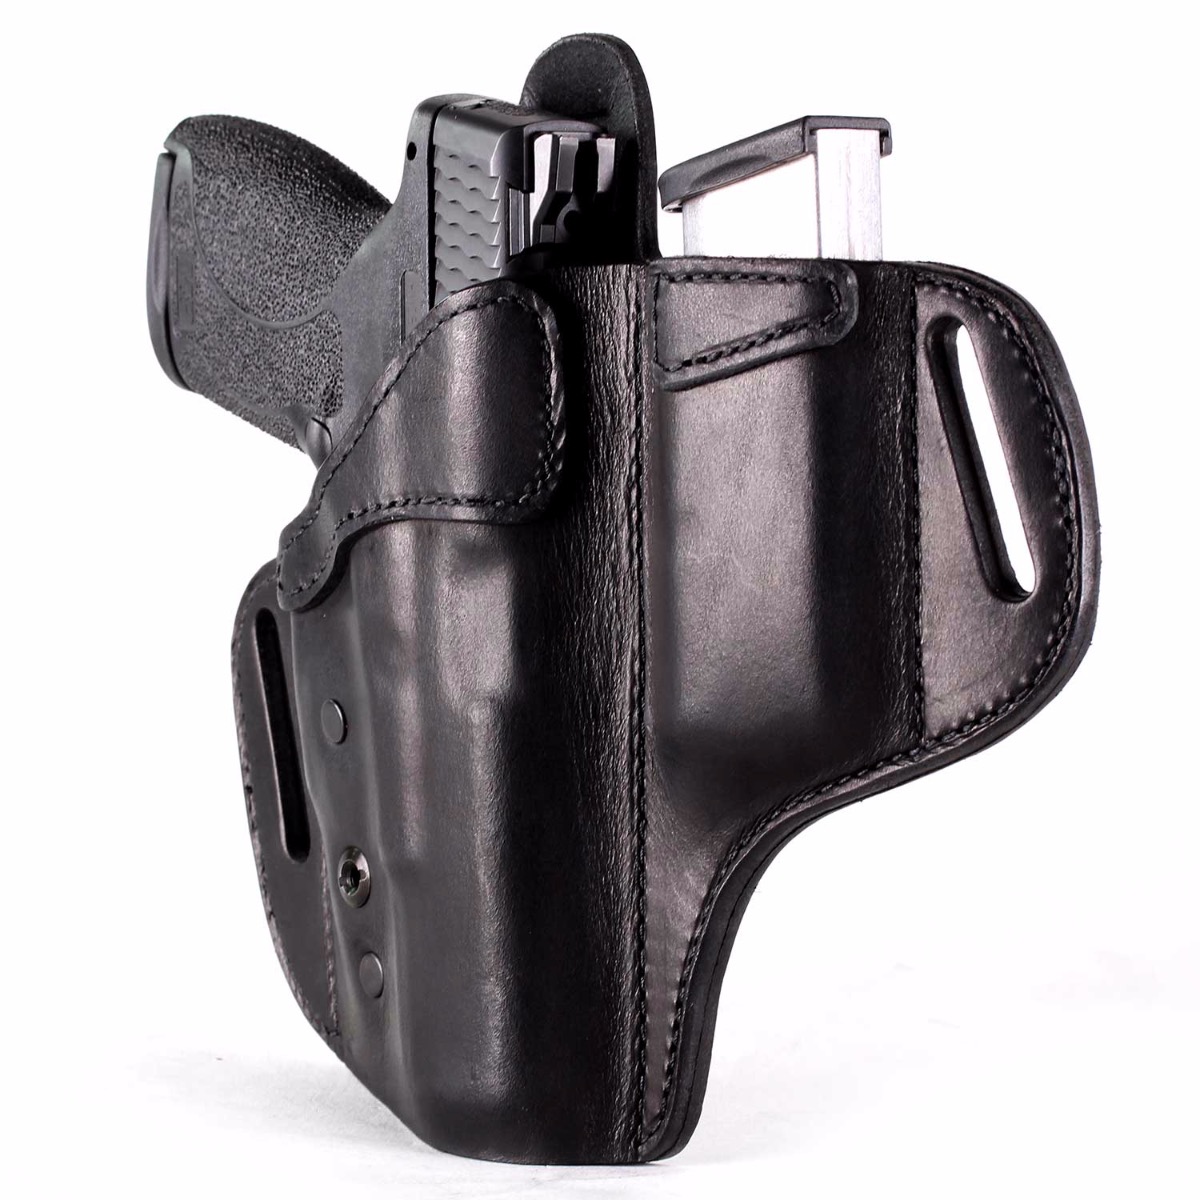 Suede Leather Holster Double Magazine Case Canik TP9SA V1 9mm 4.19''BBL #1373# 